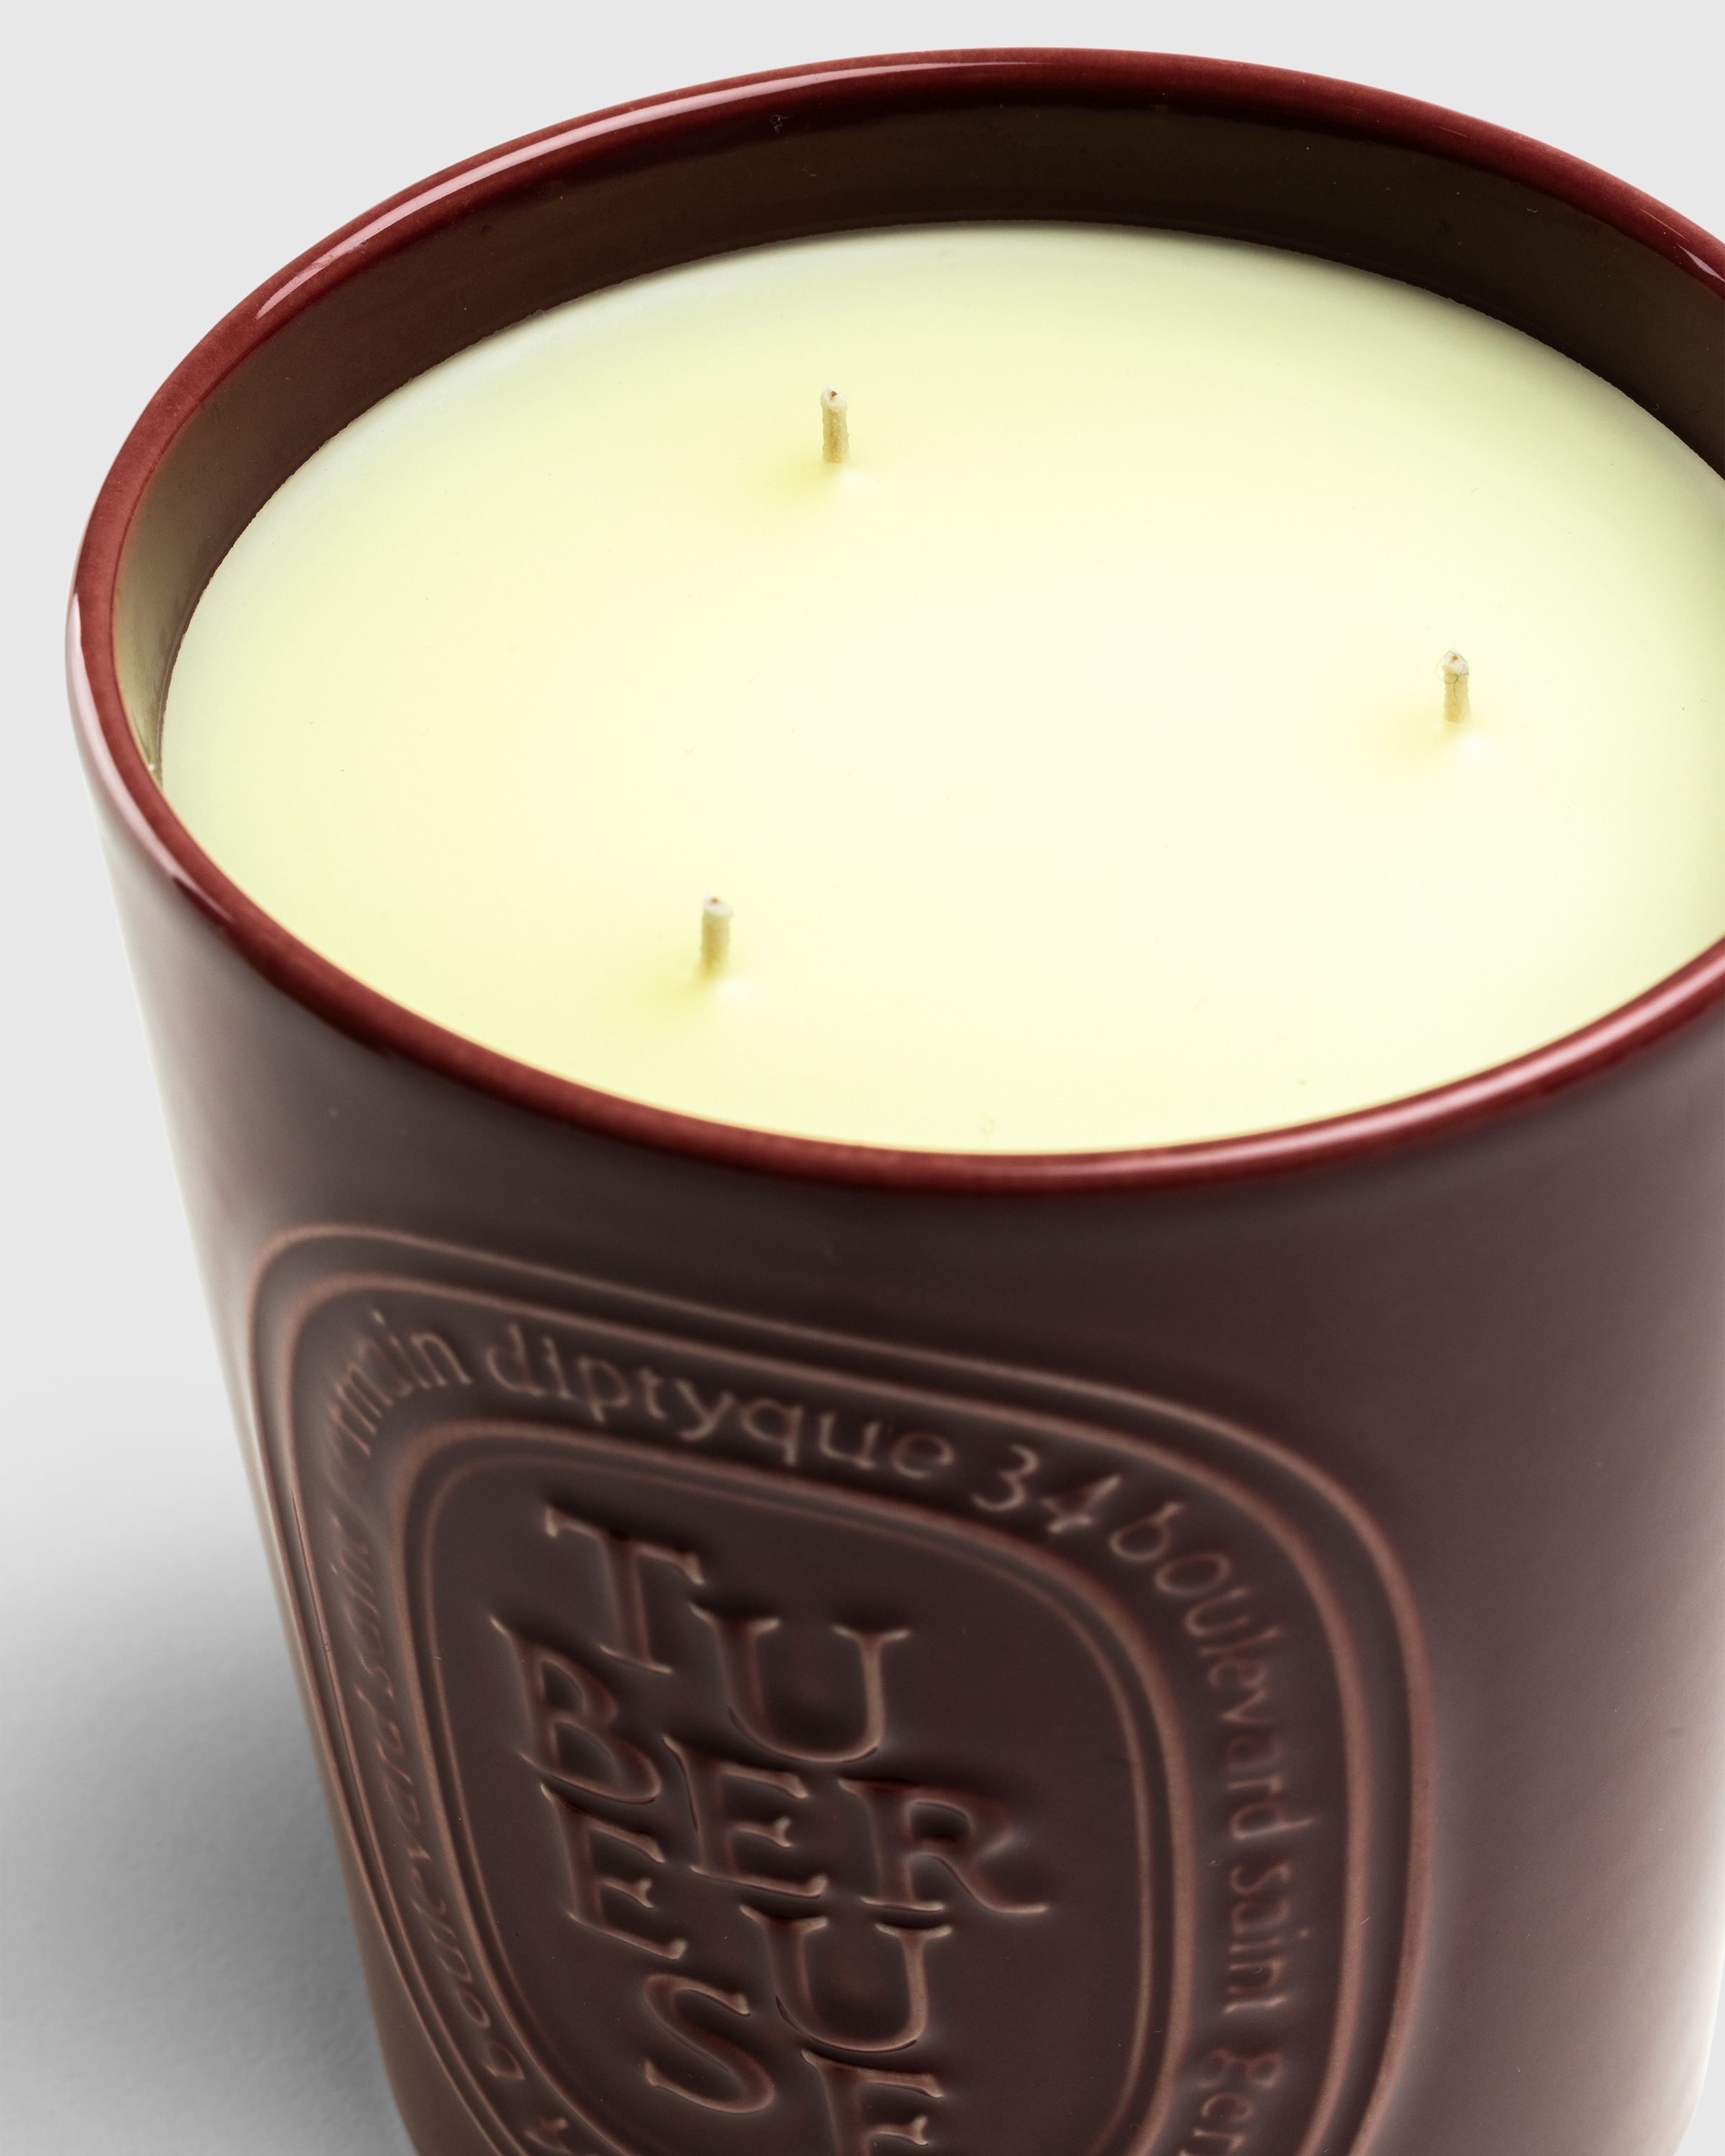 Diptyque – Candle Tubéreuse 600g - Candles & Fragrances - Red - Image 2